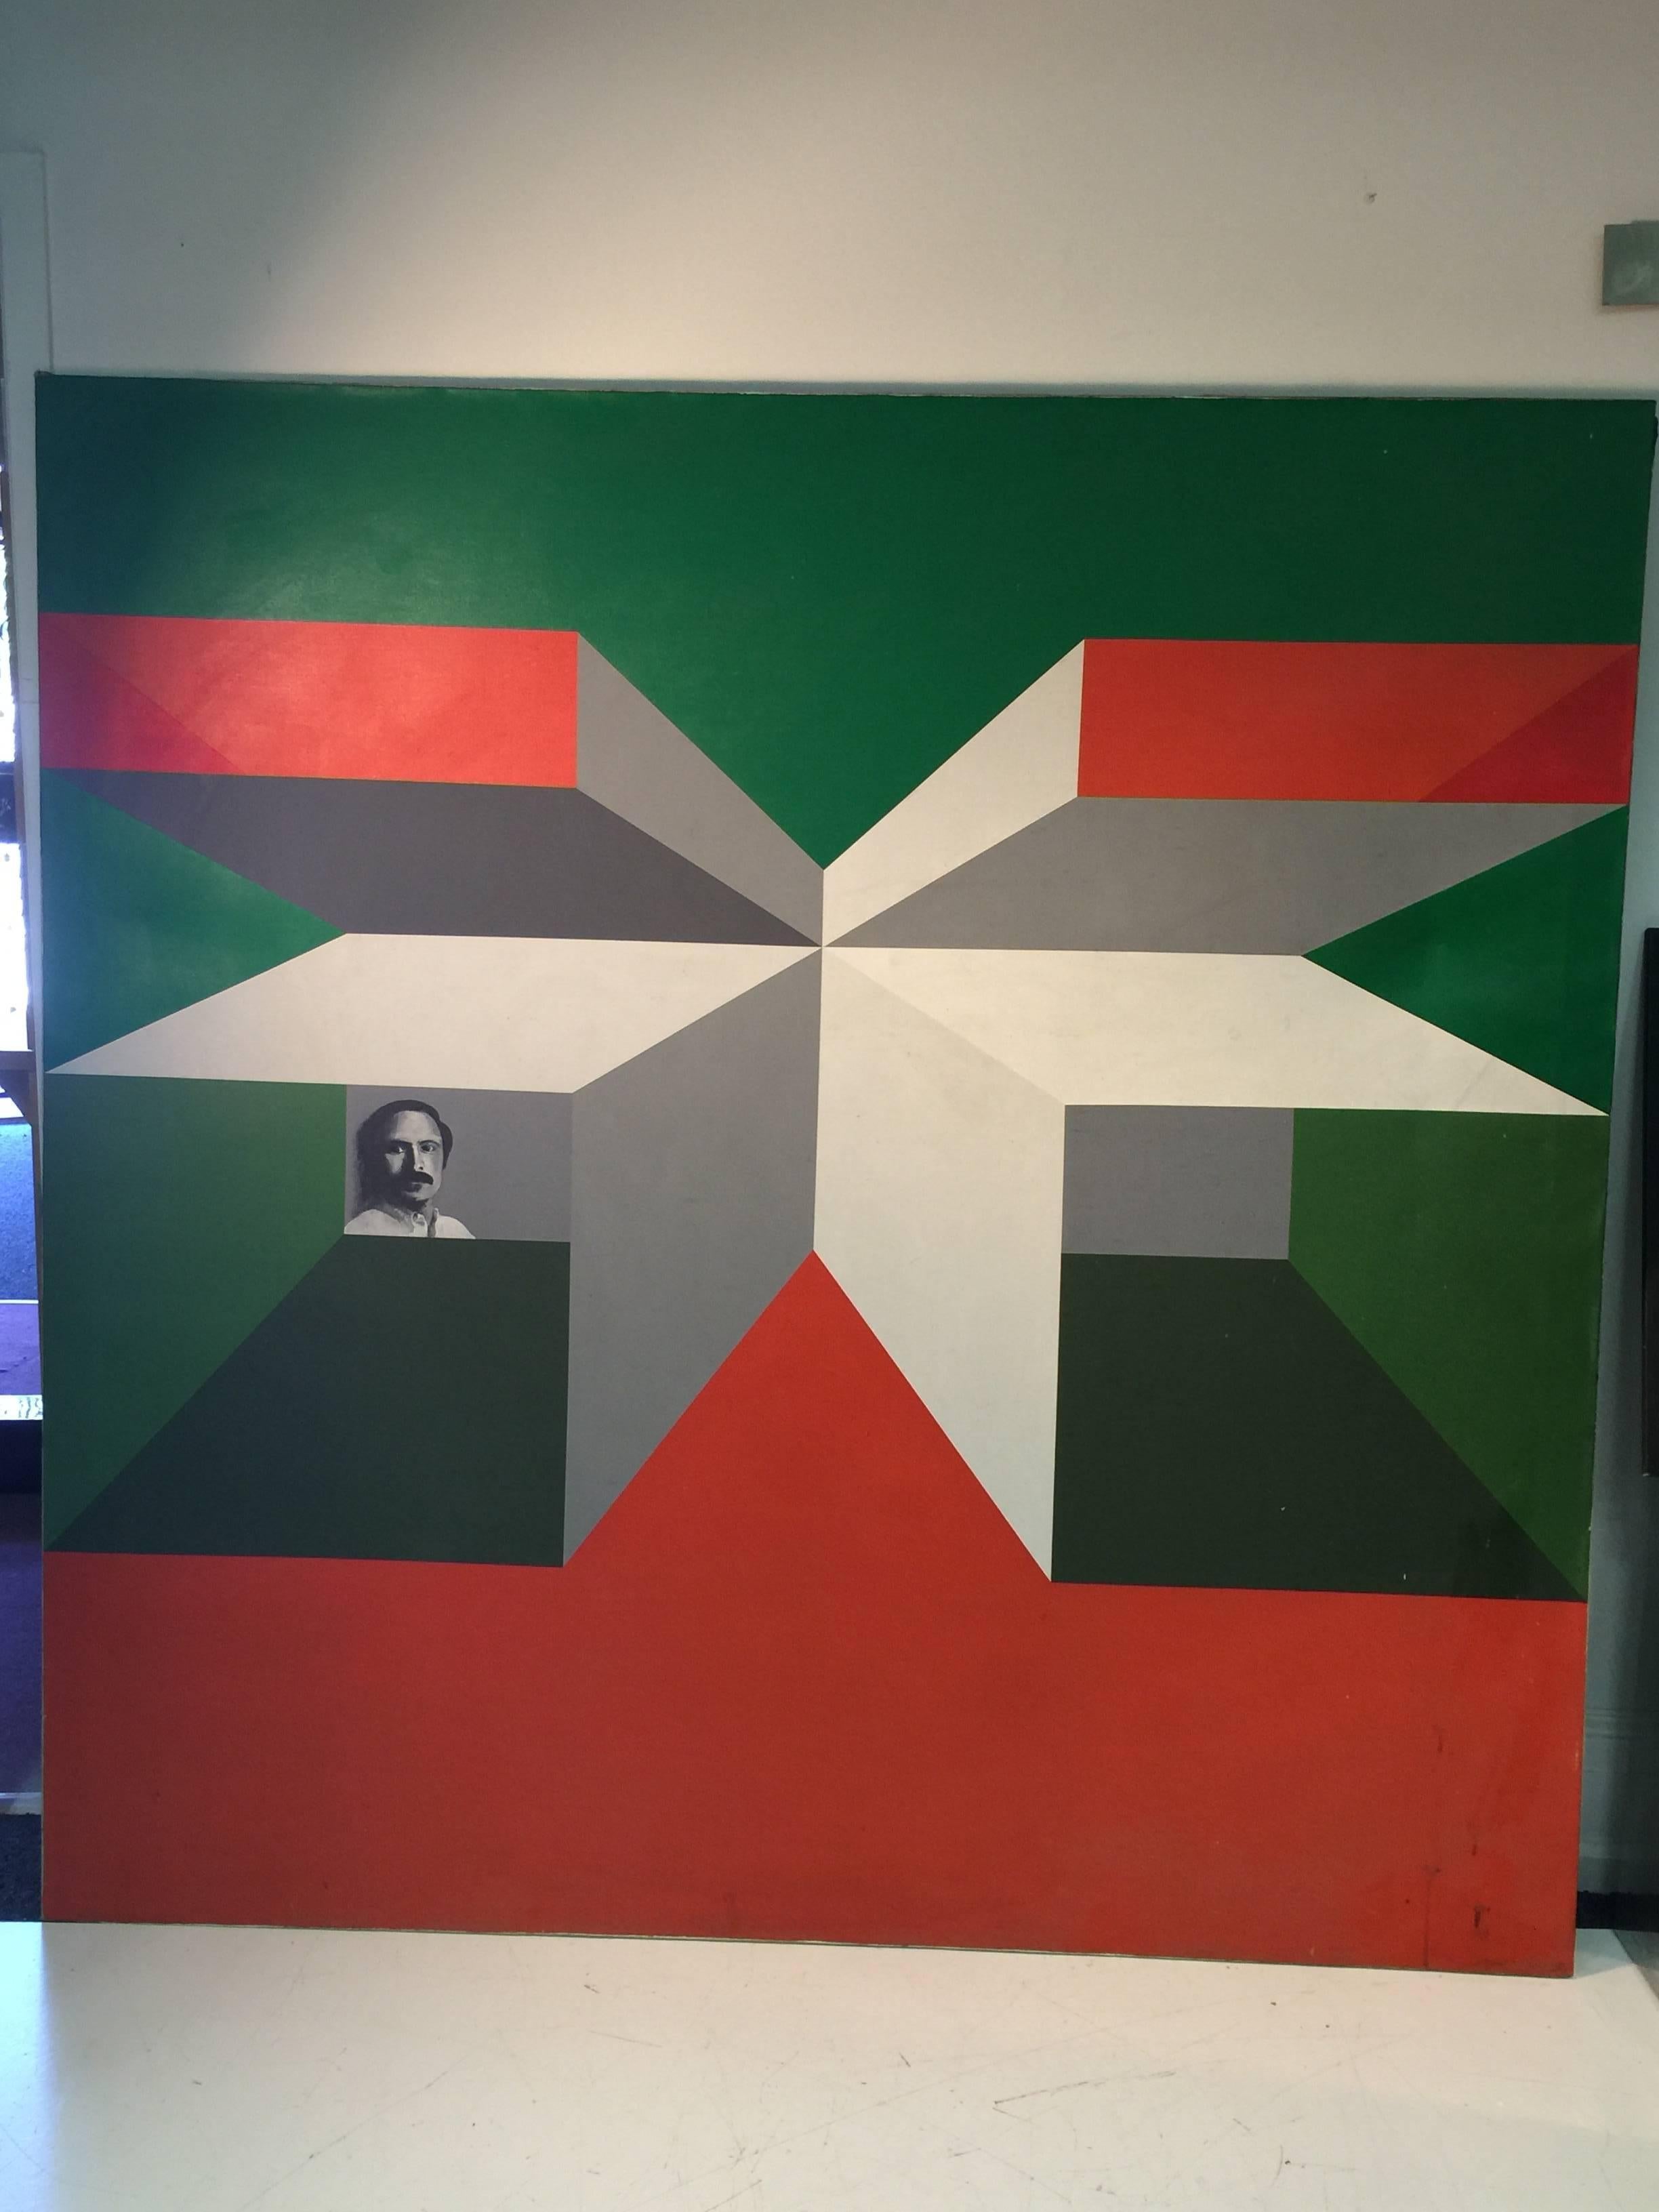 Acrylic Great Op-Art Painting with Portrait by Philadelphia Artist Charles Domsky For Sale